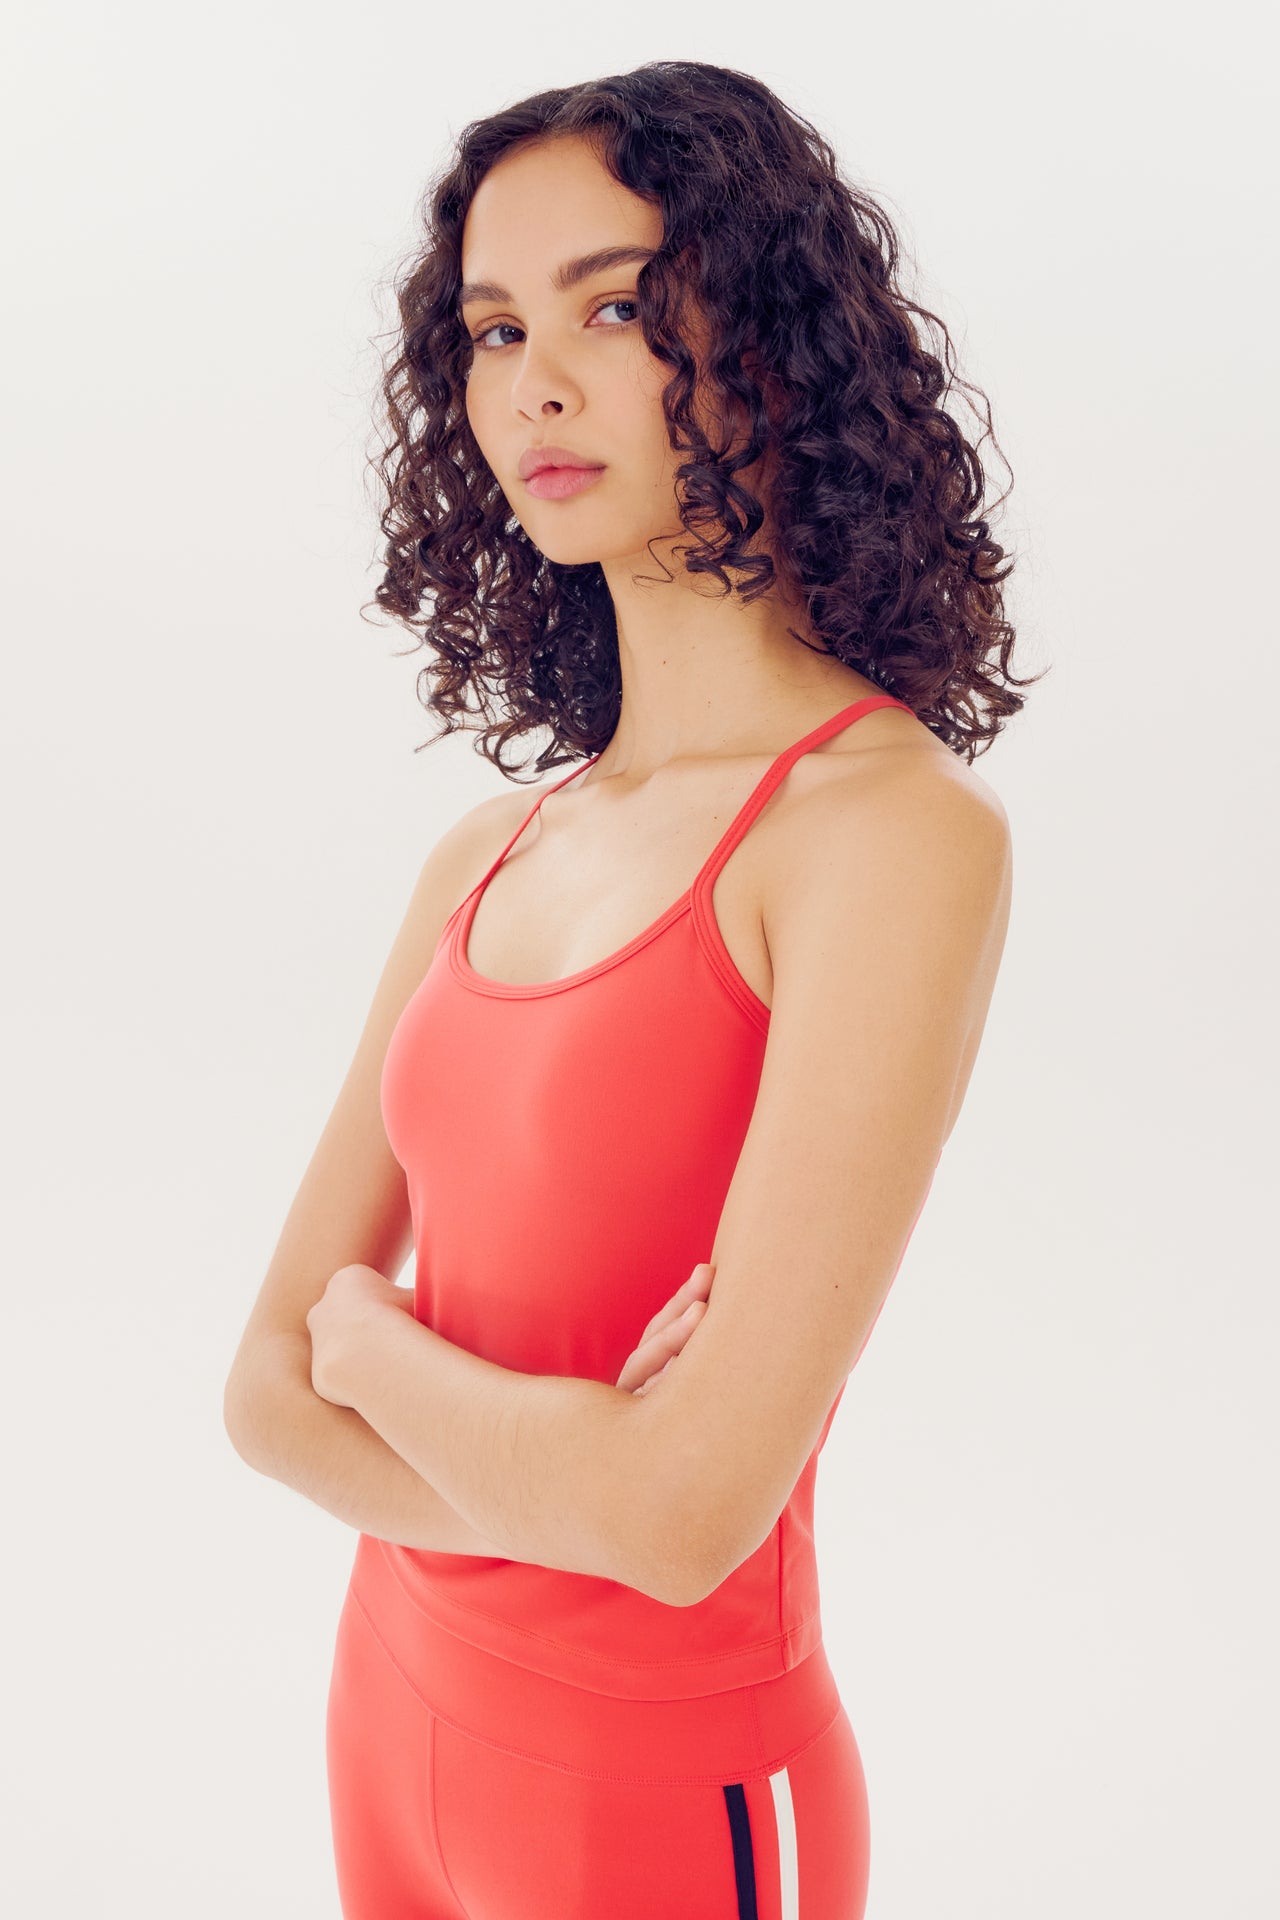 A woman with curly hair wearing a red athletic Airweight Tank by SPLITS59, made of nylon spandex fabric, standing with crossed arms against a white background.